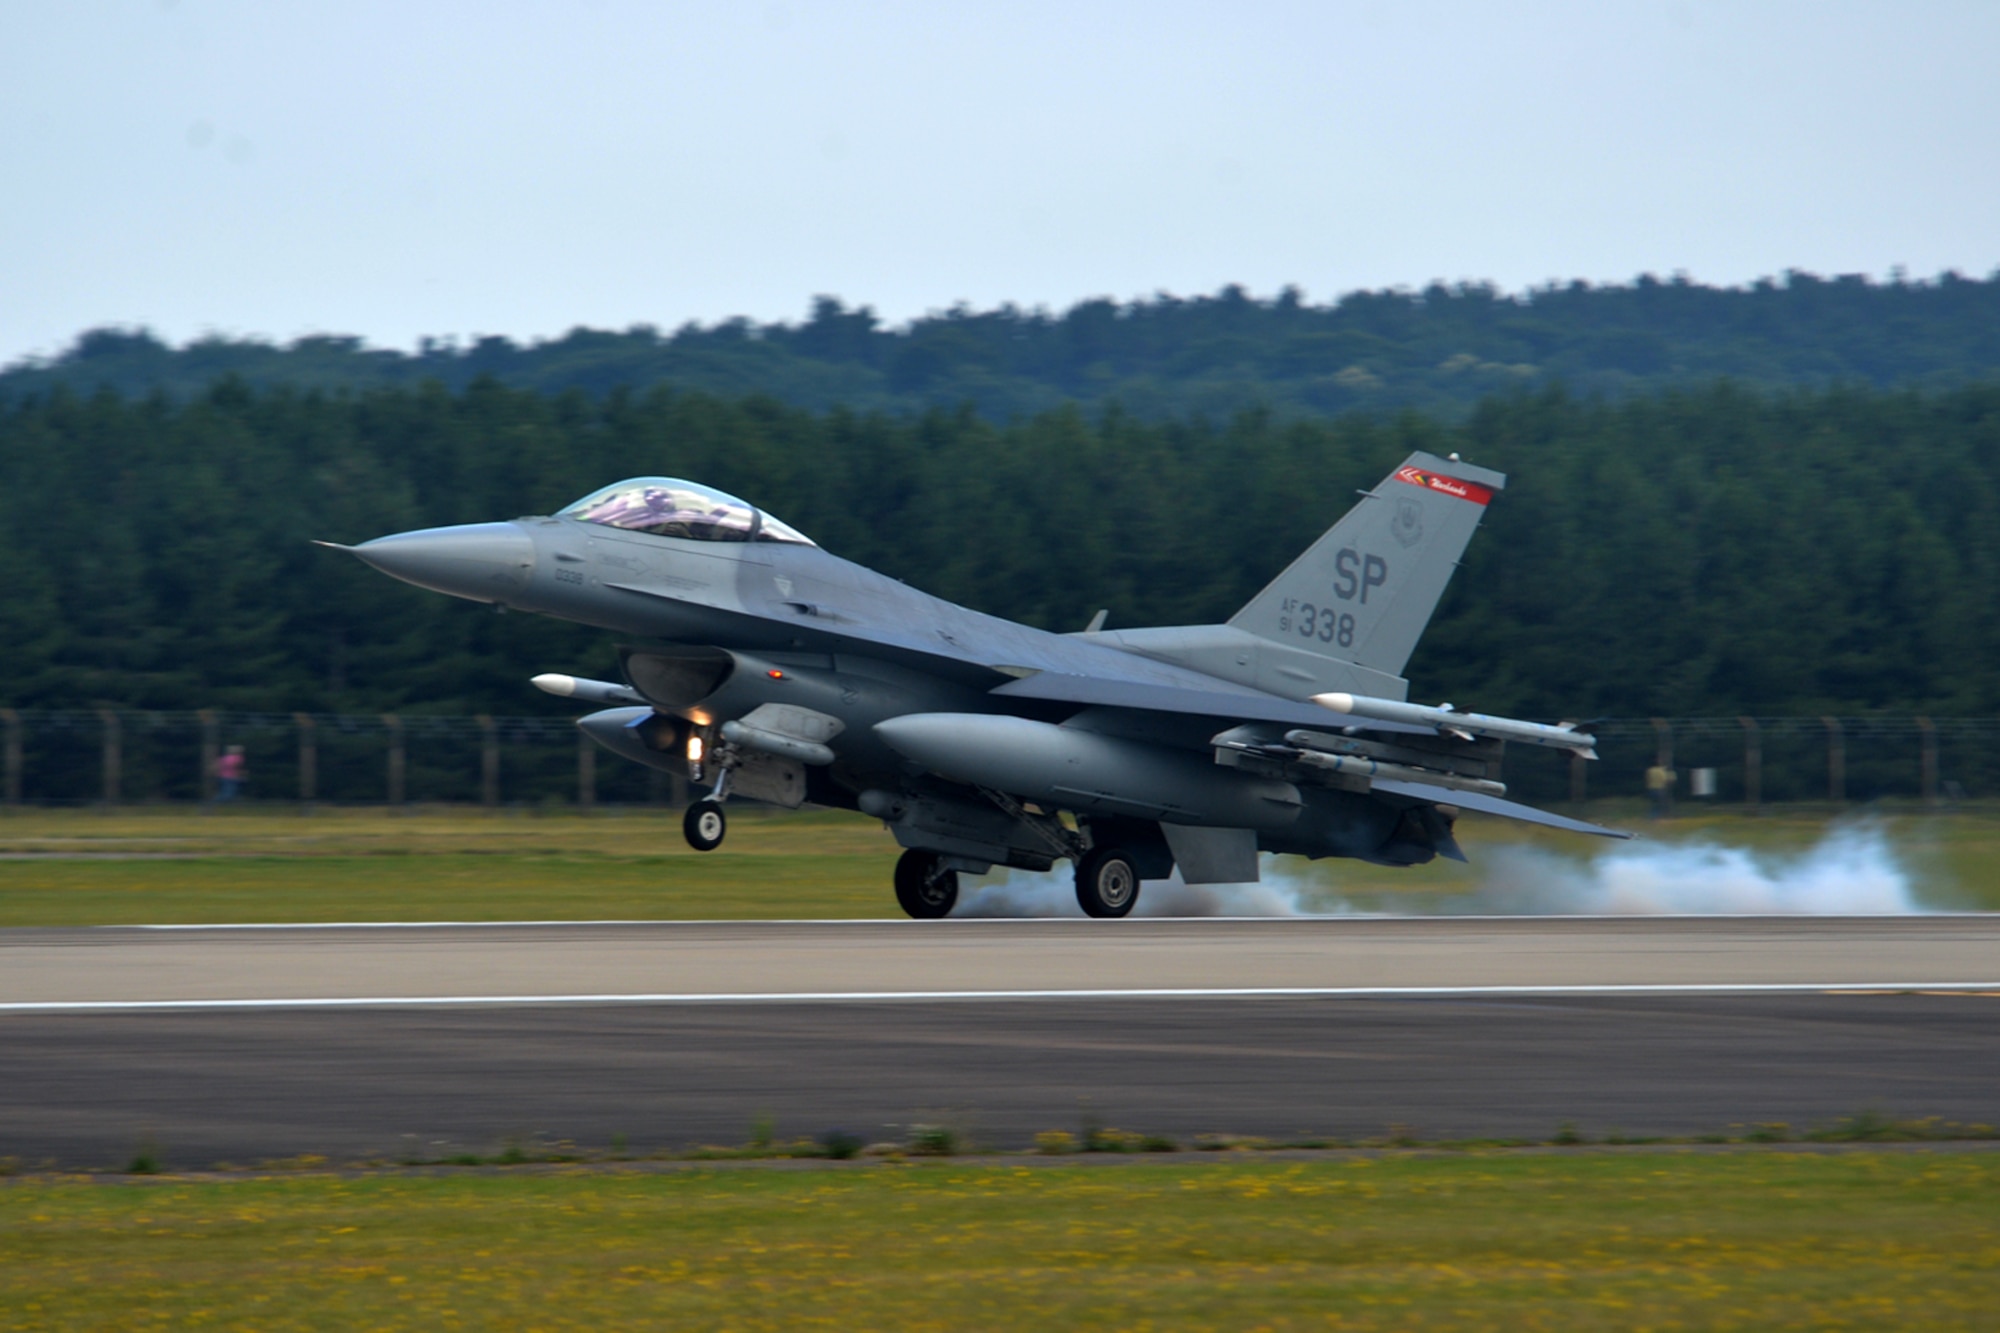 An F-16 Fighting Falcon assigned to the 52nd Fighter Wing at Spangdahlem Air Base, Germany, lands at Royal Air Force Lakenheath, England, July 10. Airmen from the 52nd FW will train alongside 48th Fighter Wing Airmen and British Allies during a flying training deployment here, which is scheduled to last several weeks. (U.S. Air Force photo/Master Sgt. Eric Burks)